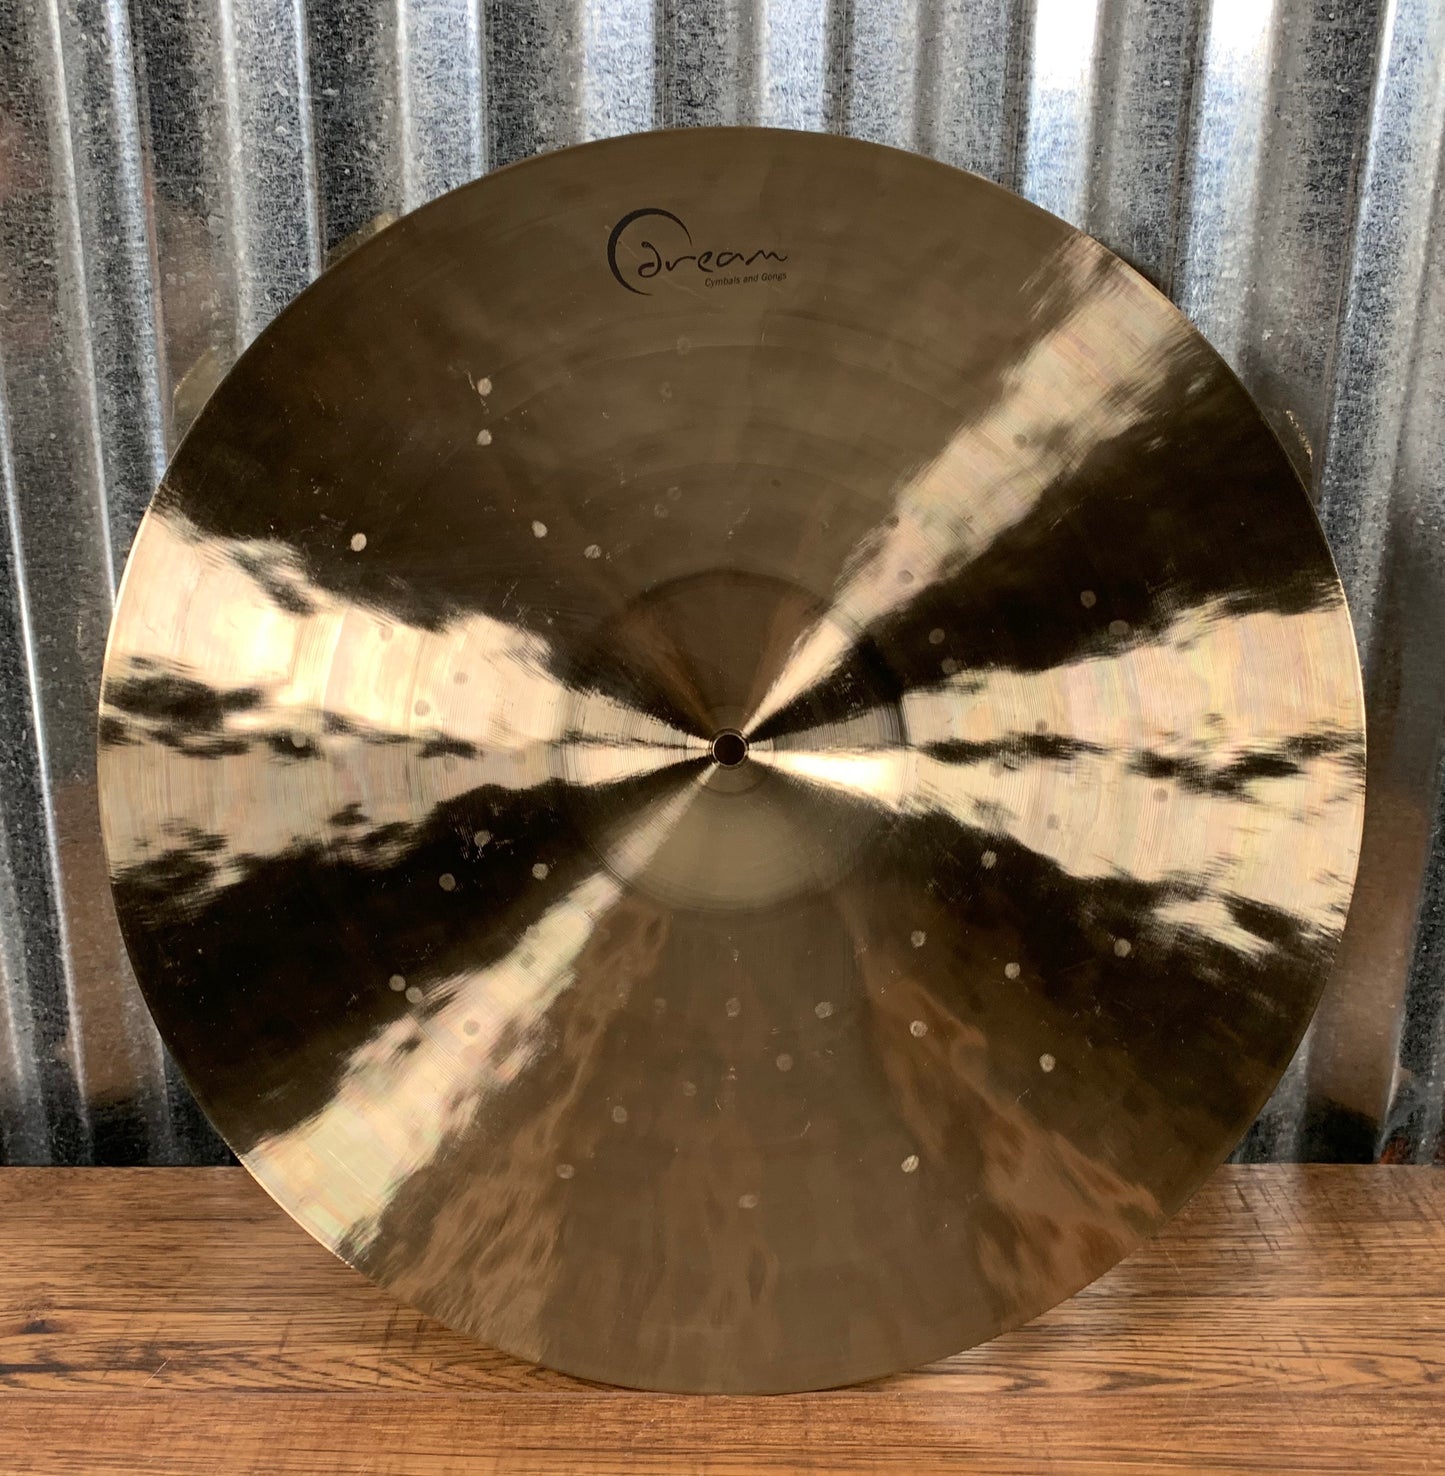 Dream Cymbals VBCRRI19 Vintage Bliss Hand Forged & Hammered 19" Crash Ride